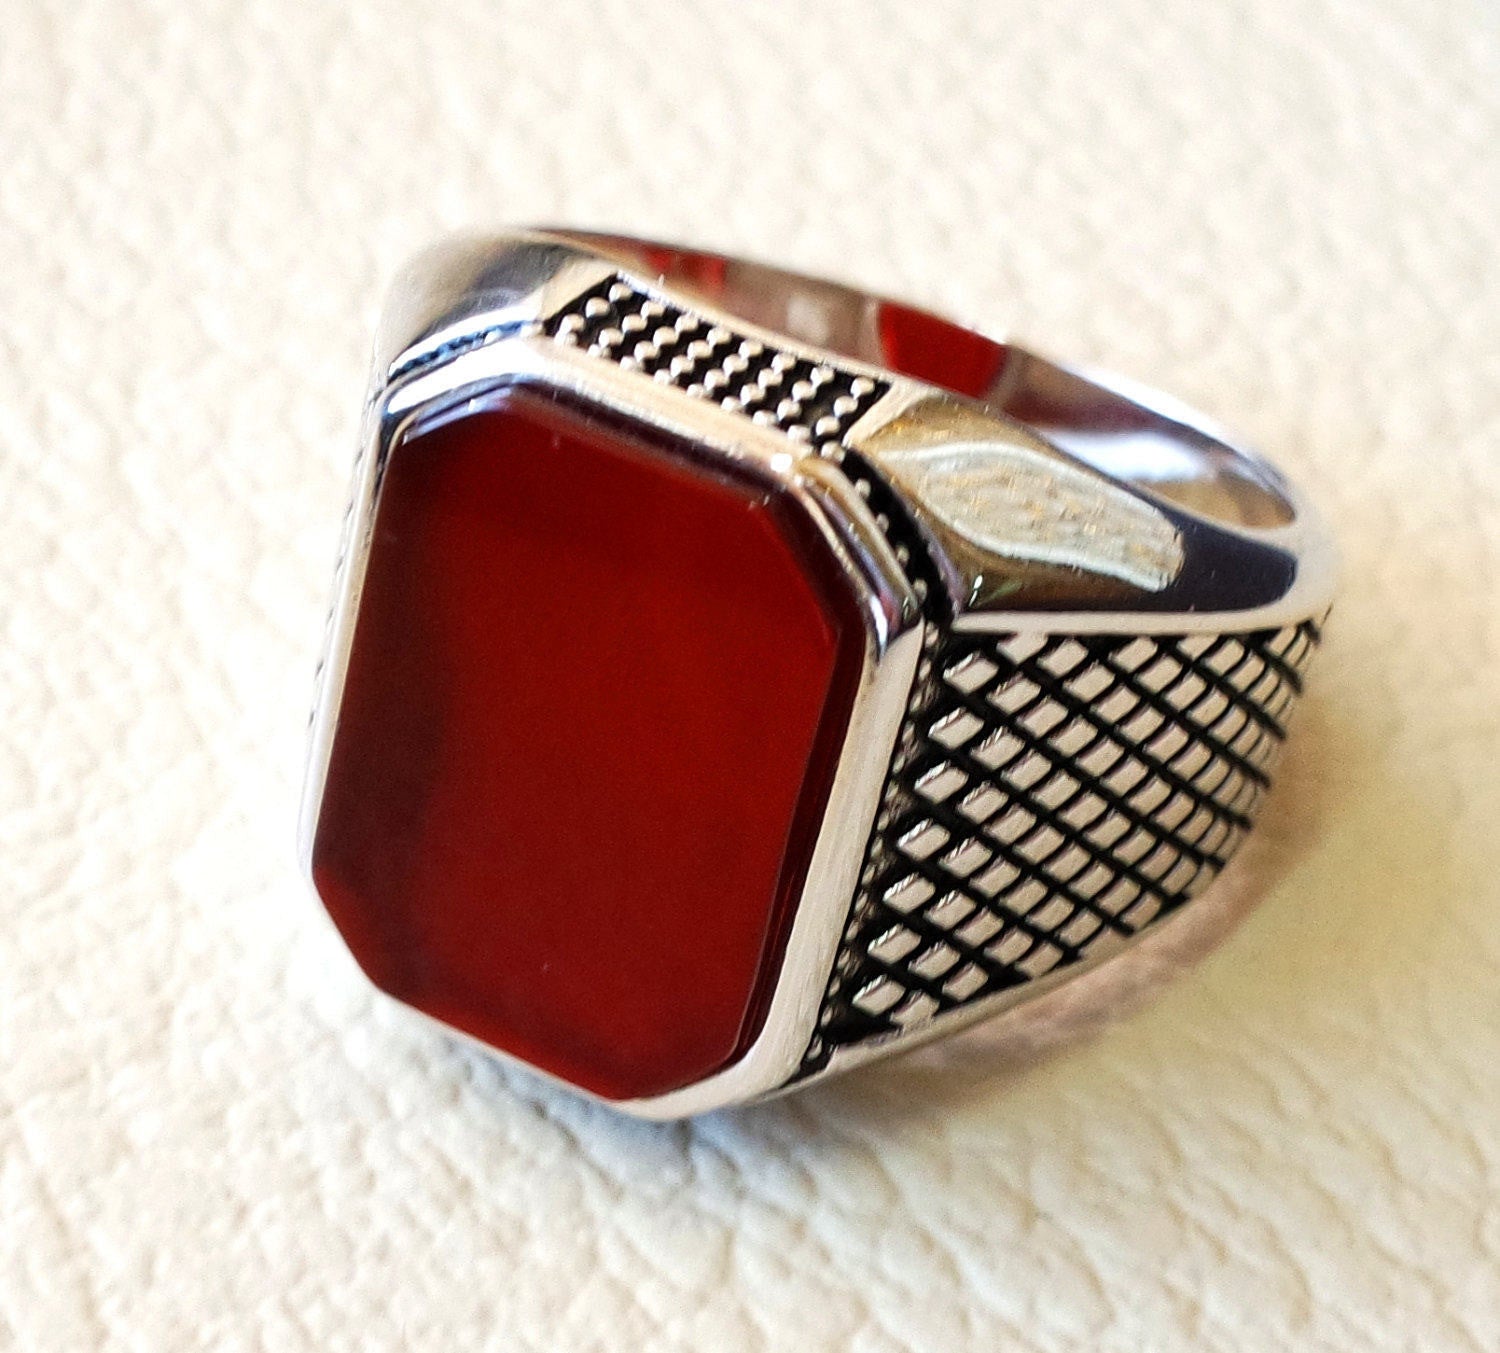 cushion rectangular octagon agate red aqeeq carnelian man ring sterling silver 925 natural stone gem all sizes jewelry fast shipping